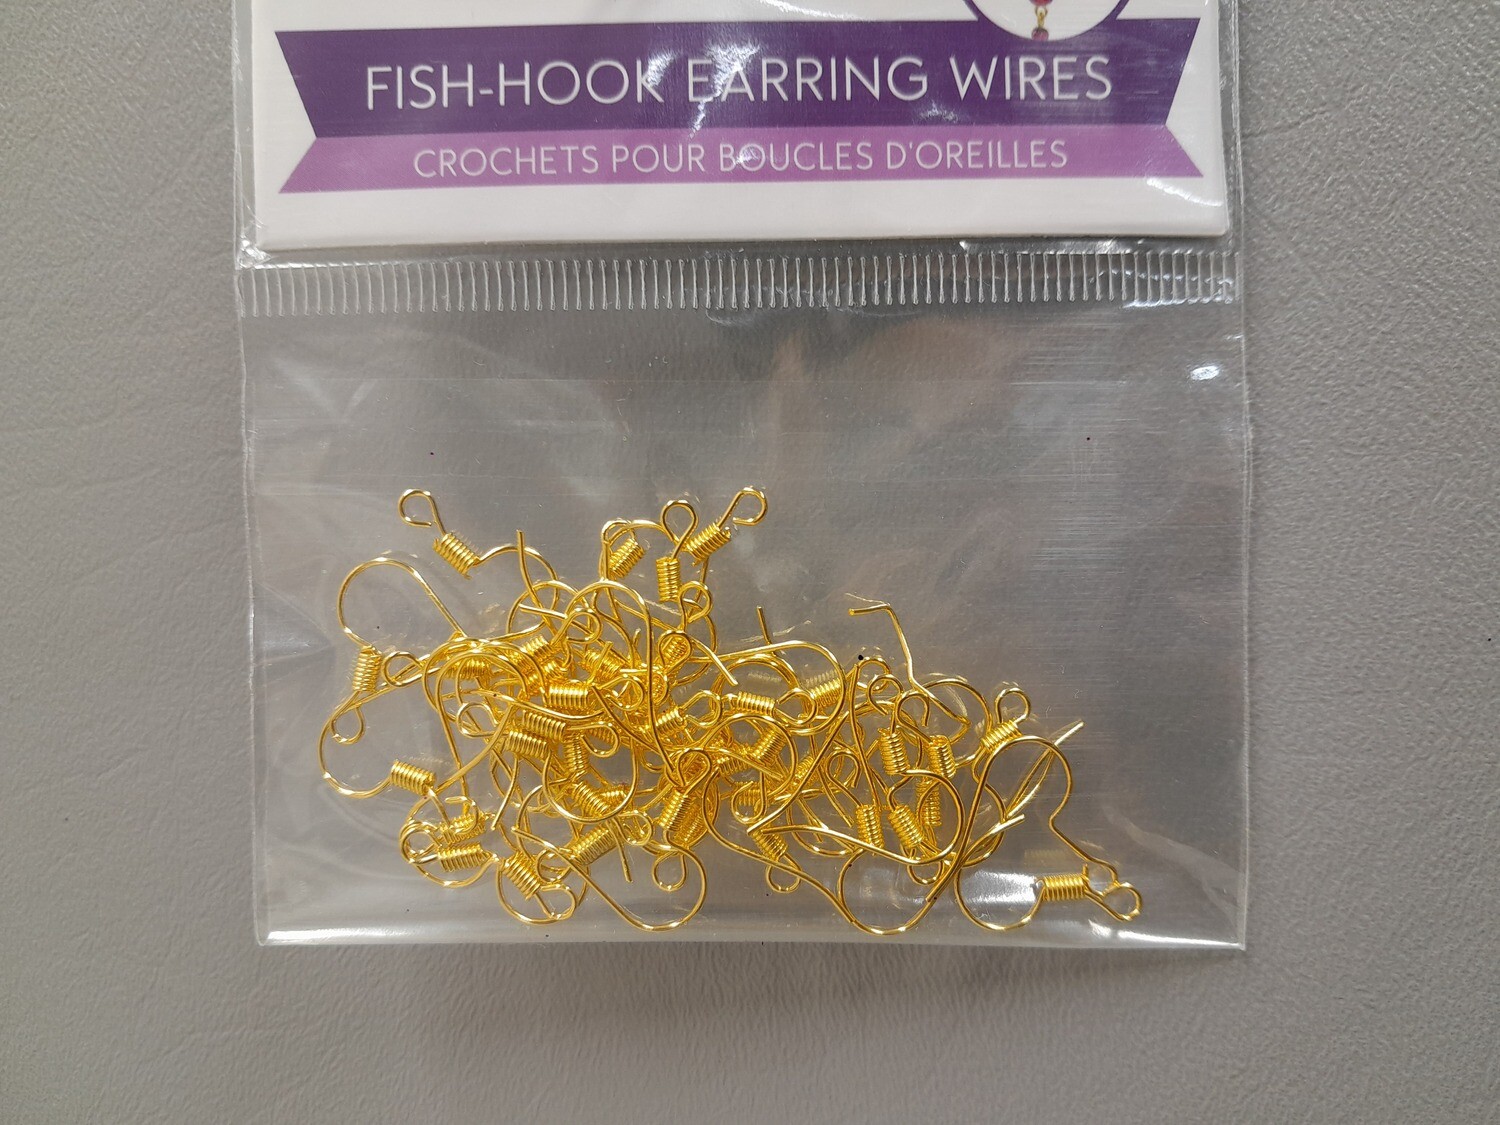 45pc 3/4 Fish Hook Earring Wires Gold